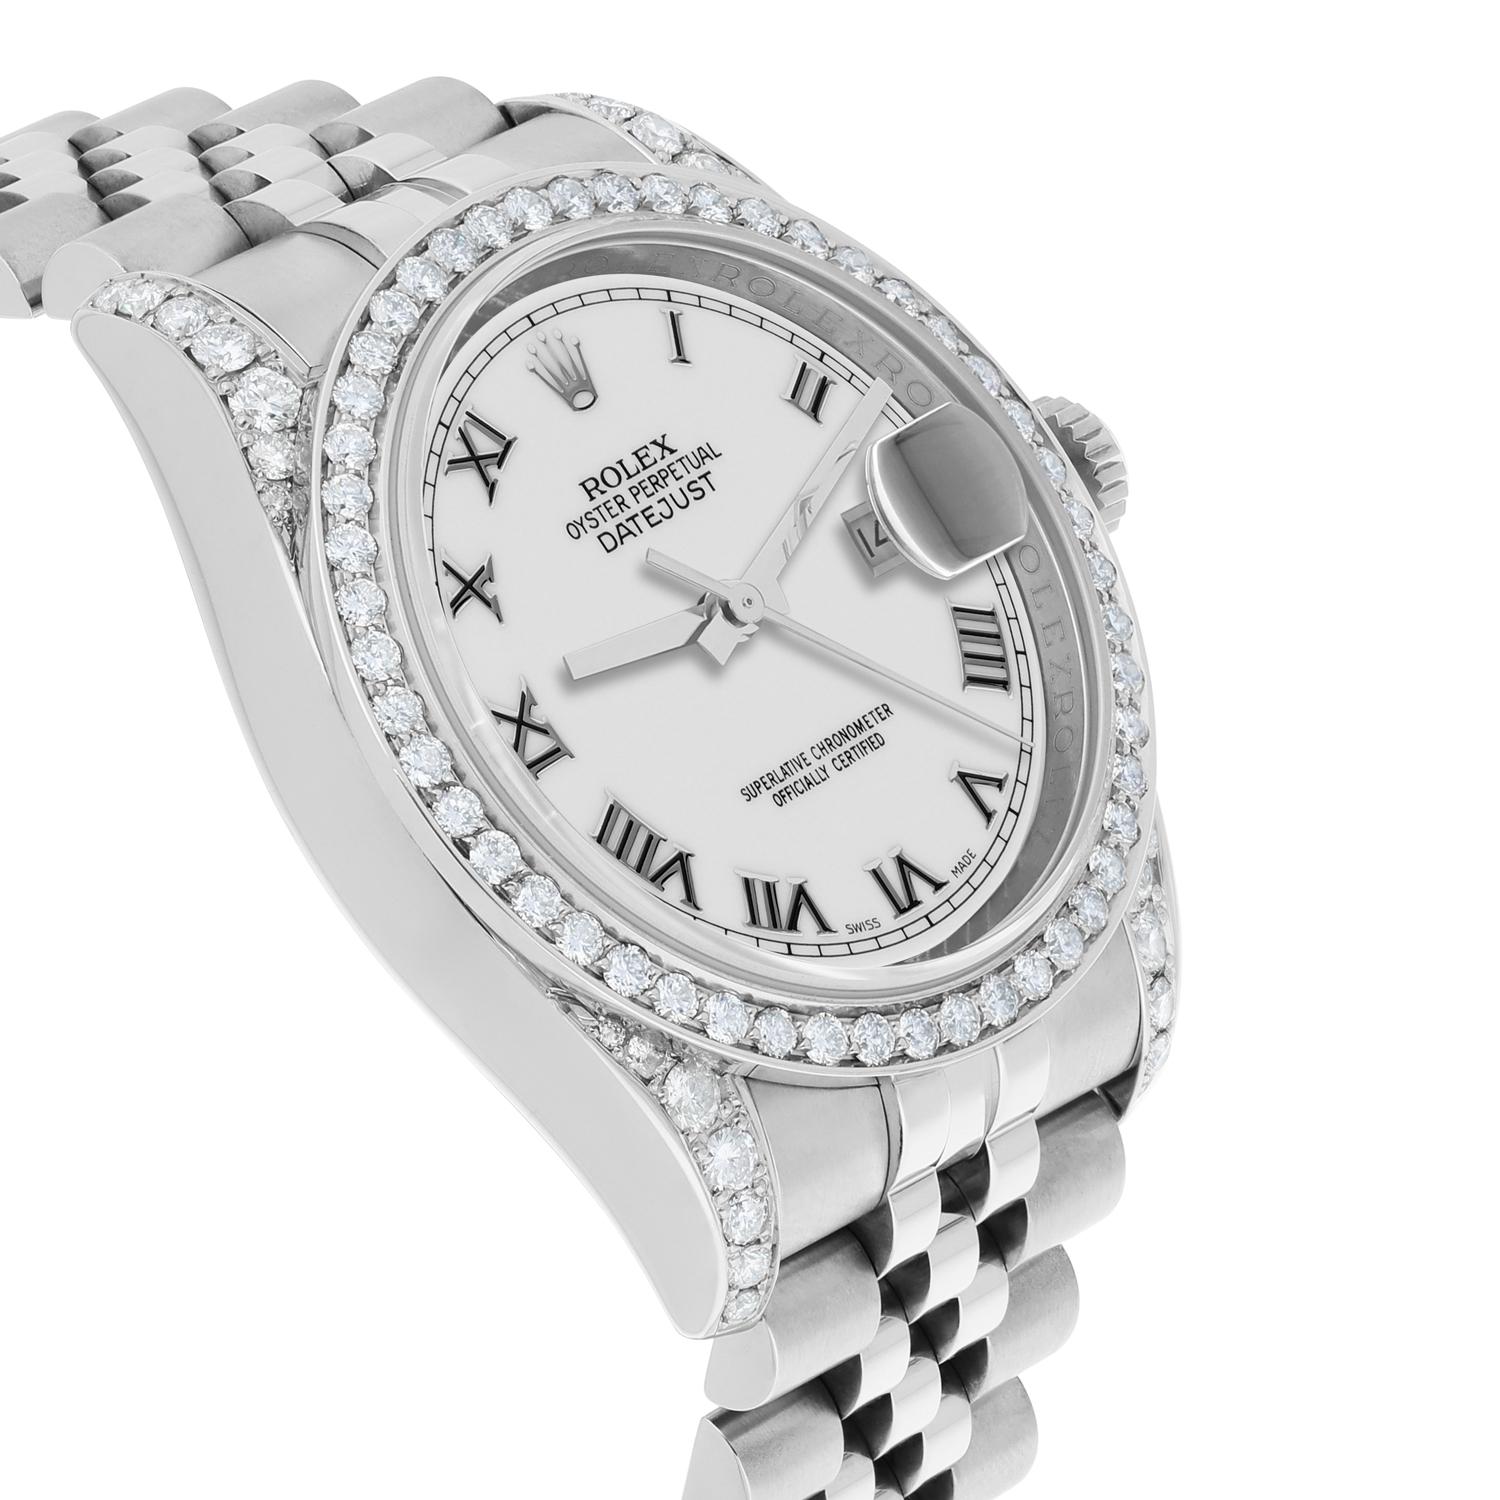 Rolex Datejust 36 116234 Diamond Unisex Watch White Roman Dial Jubilee Band In Excellent Condition For Sale In New York, NY